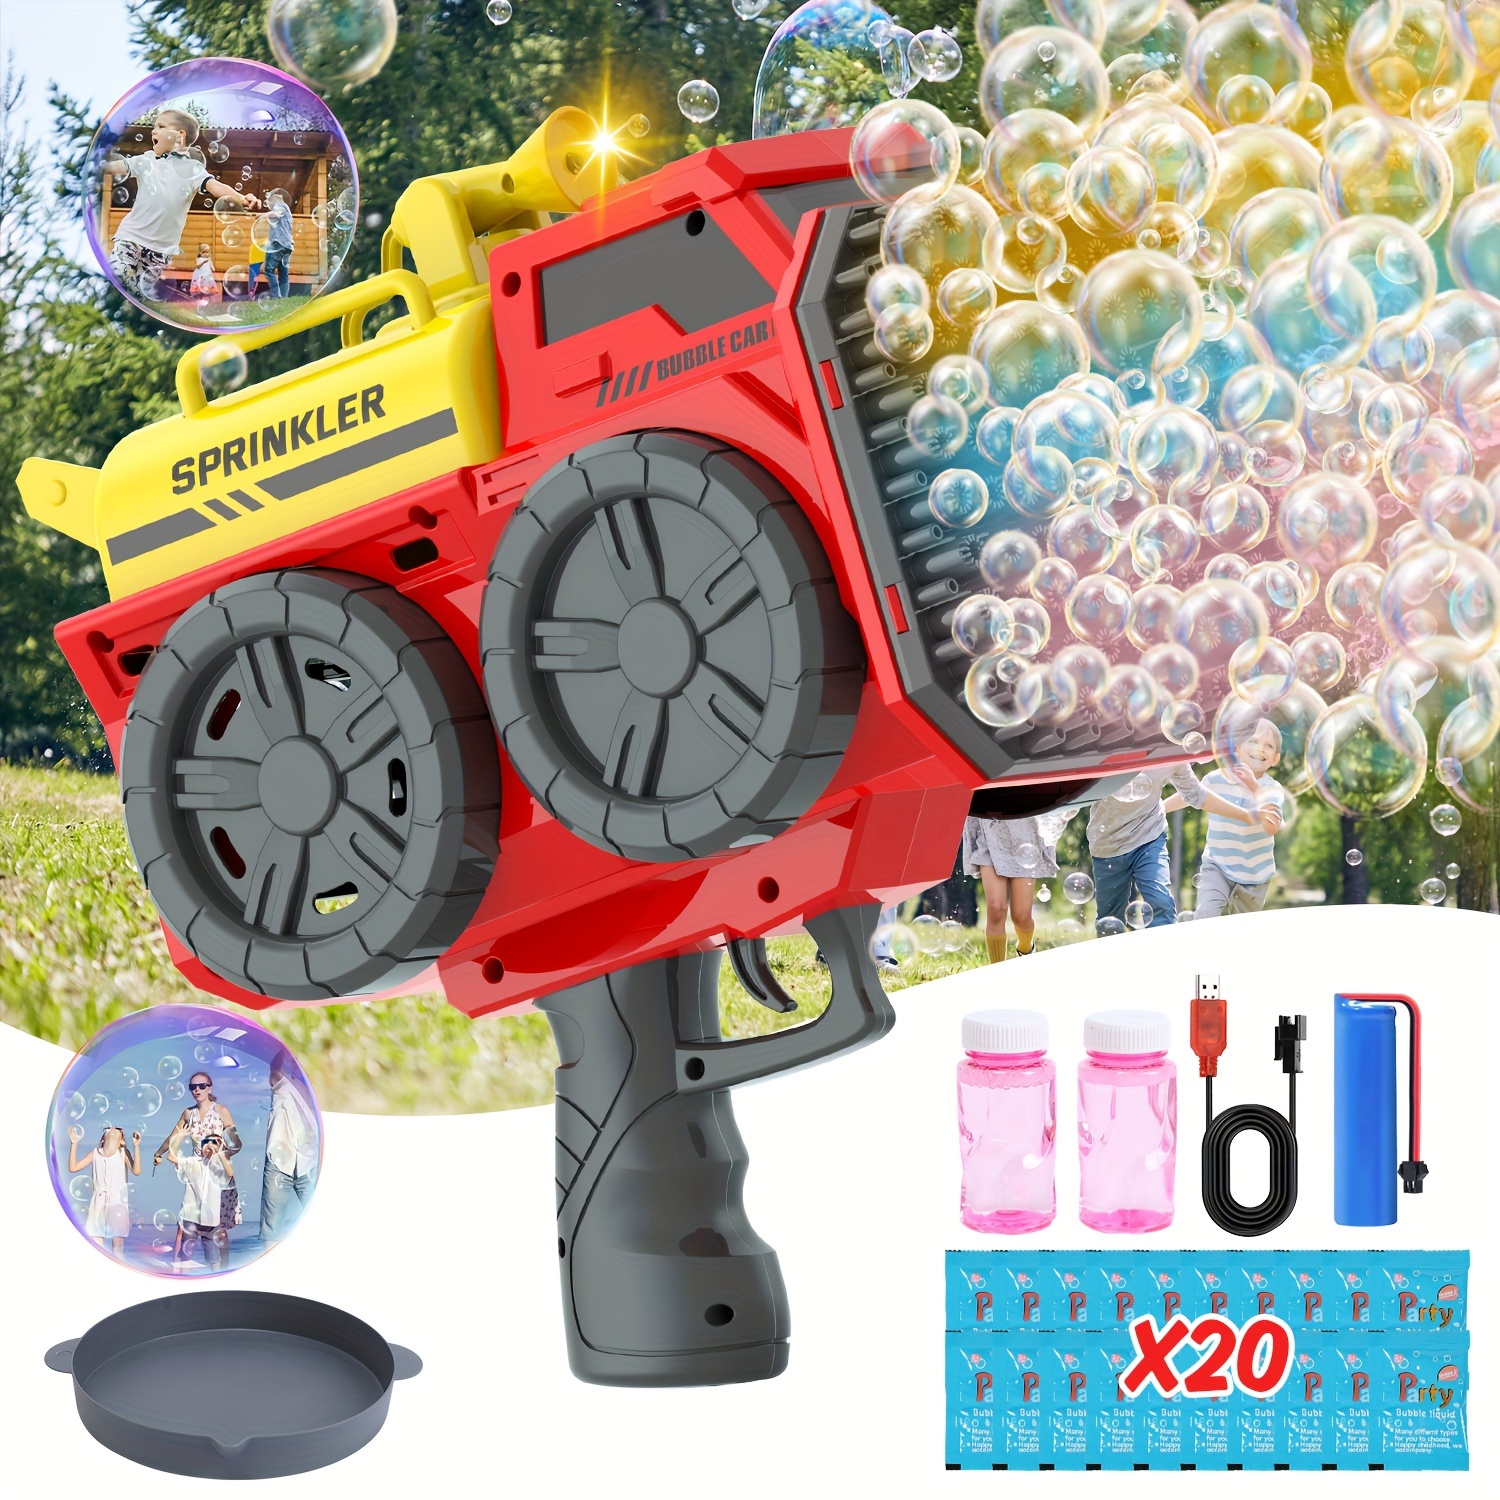 

Eaglestone Bubble Machine Gun, 139 Holes Bubbles Gun Kids Toys For Boys Girls Age 3 4 5 6 7 8 9 10 Year Old, Easter Basket Stuffers Birthday Wedding Party Favors Gifts